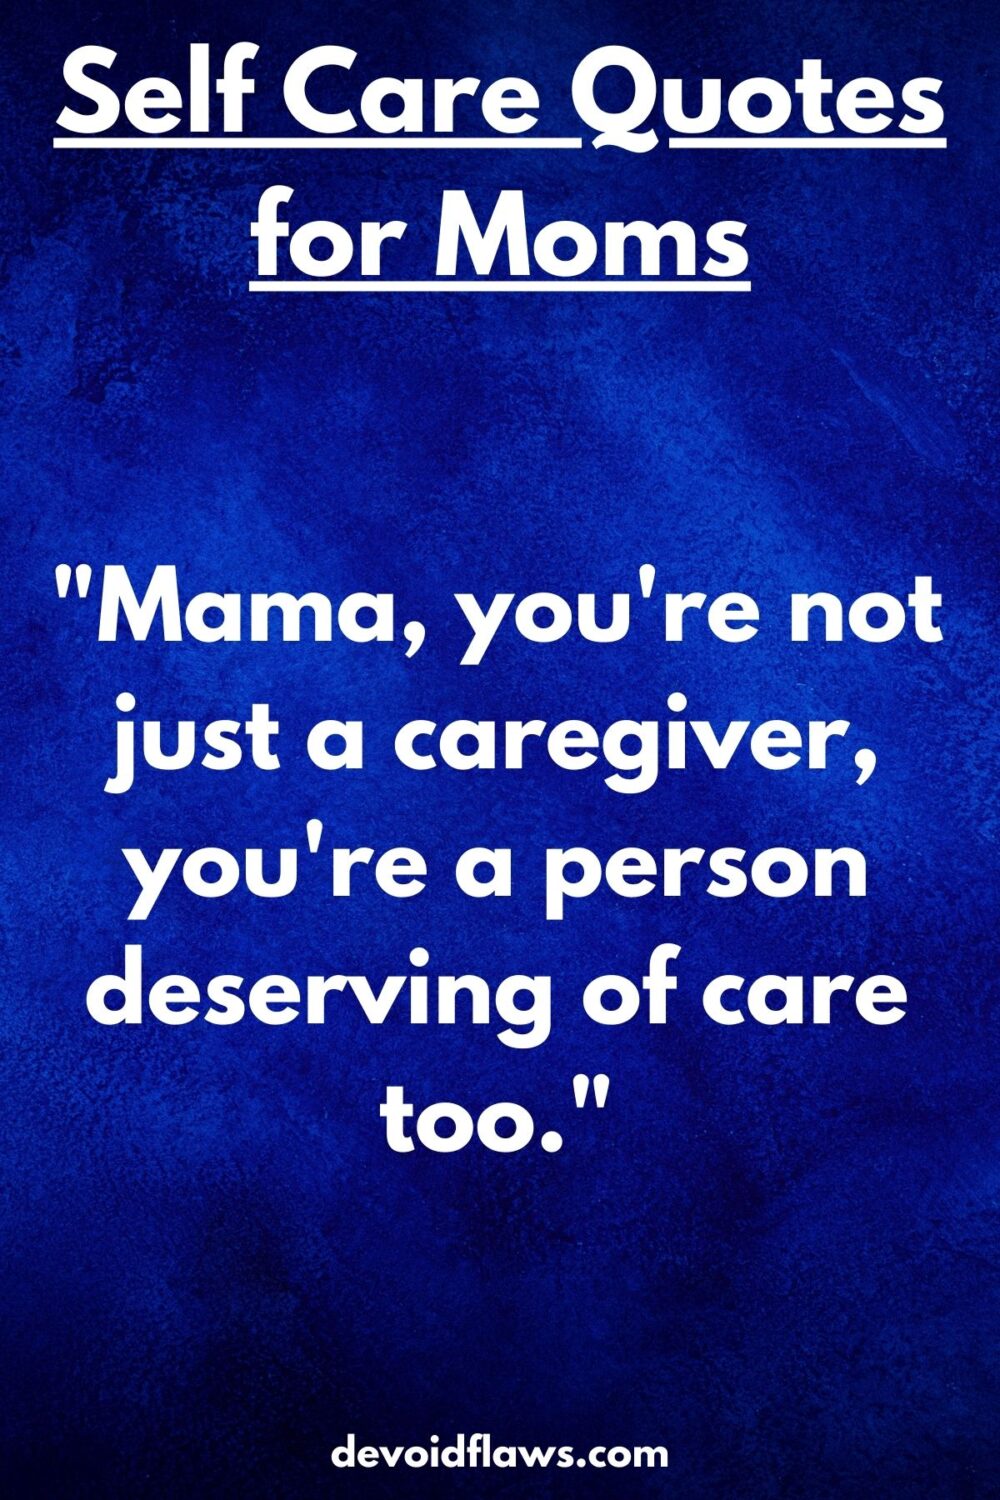 Self Care Quotes For Moms